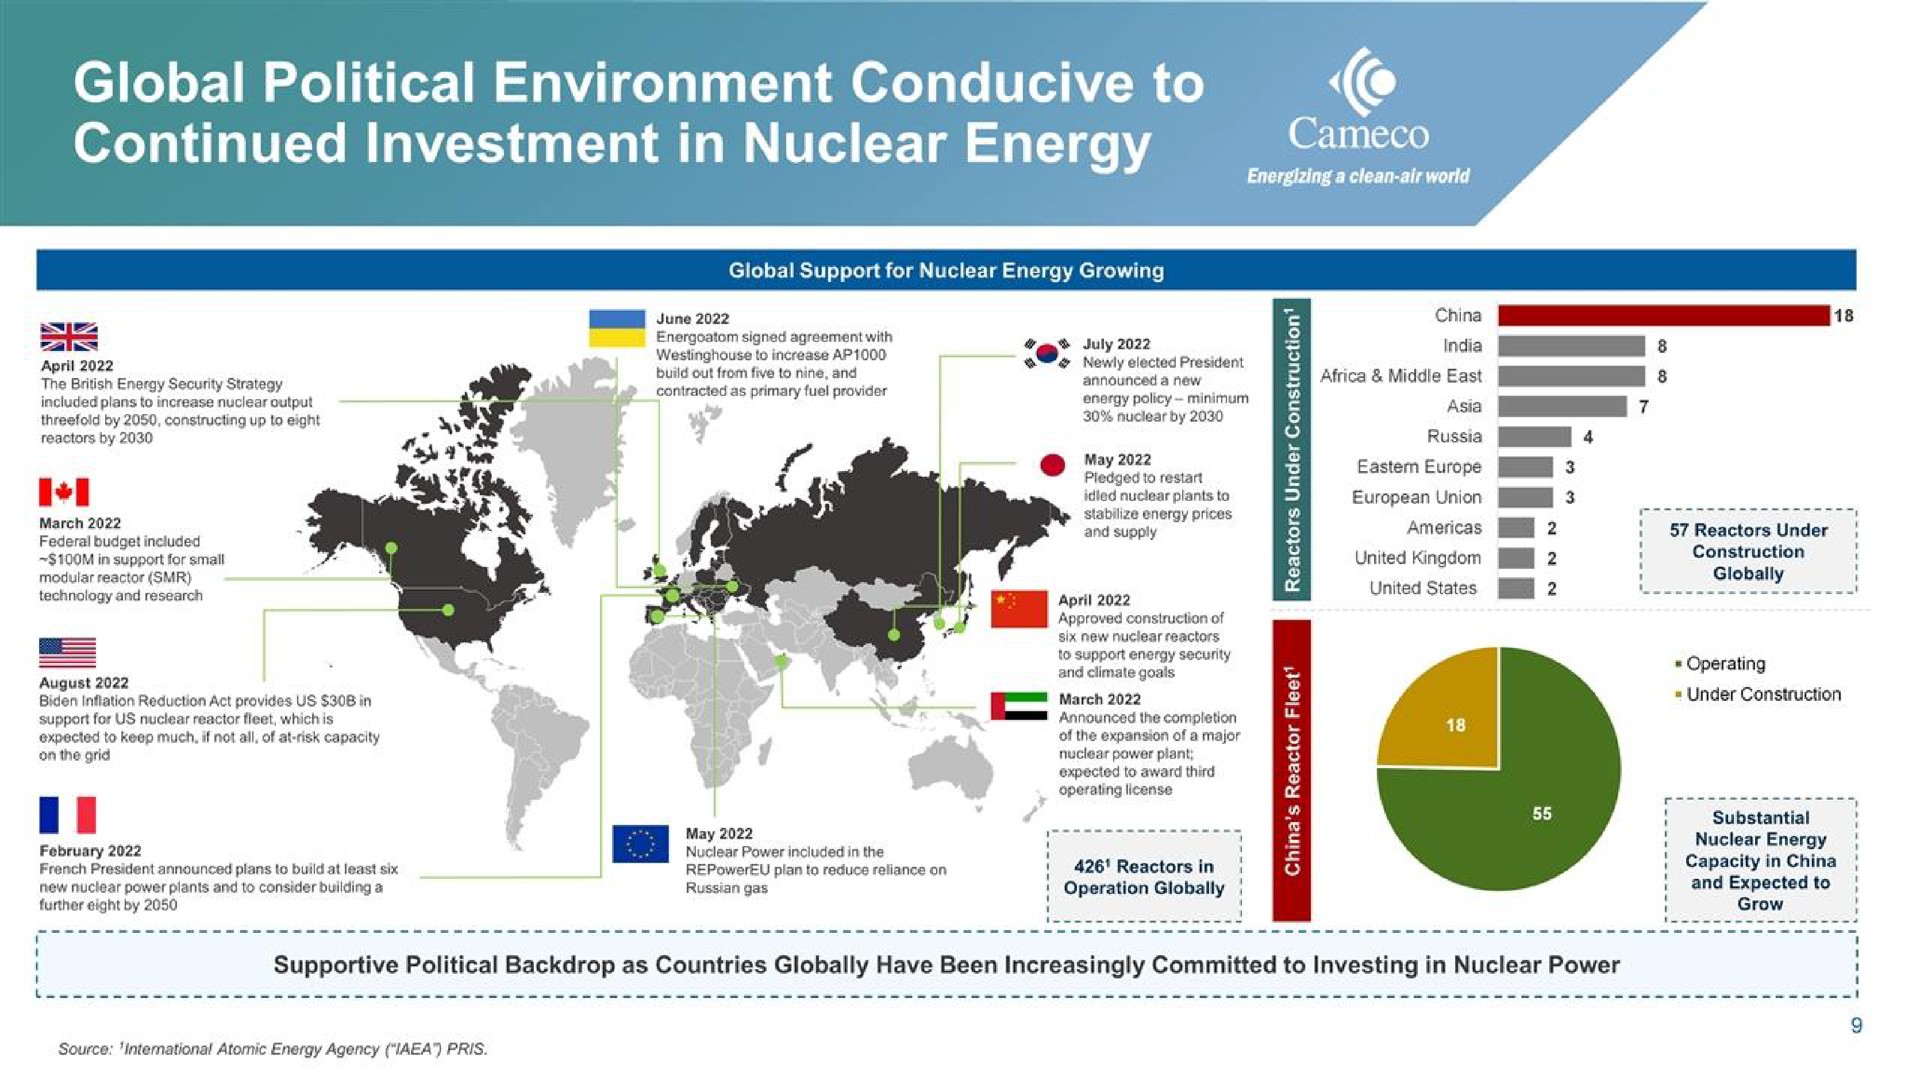 global political environment conducive to continued investment in nuclear energy | Cameco